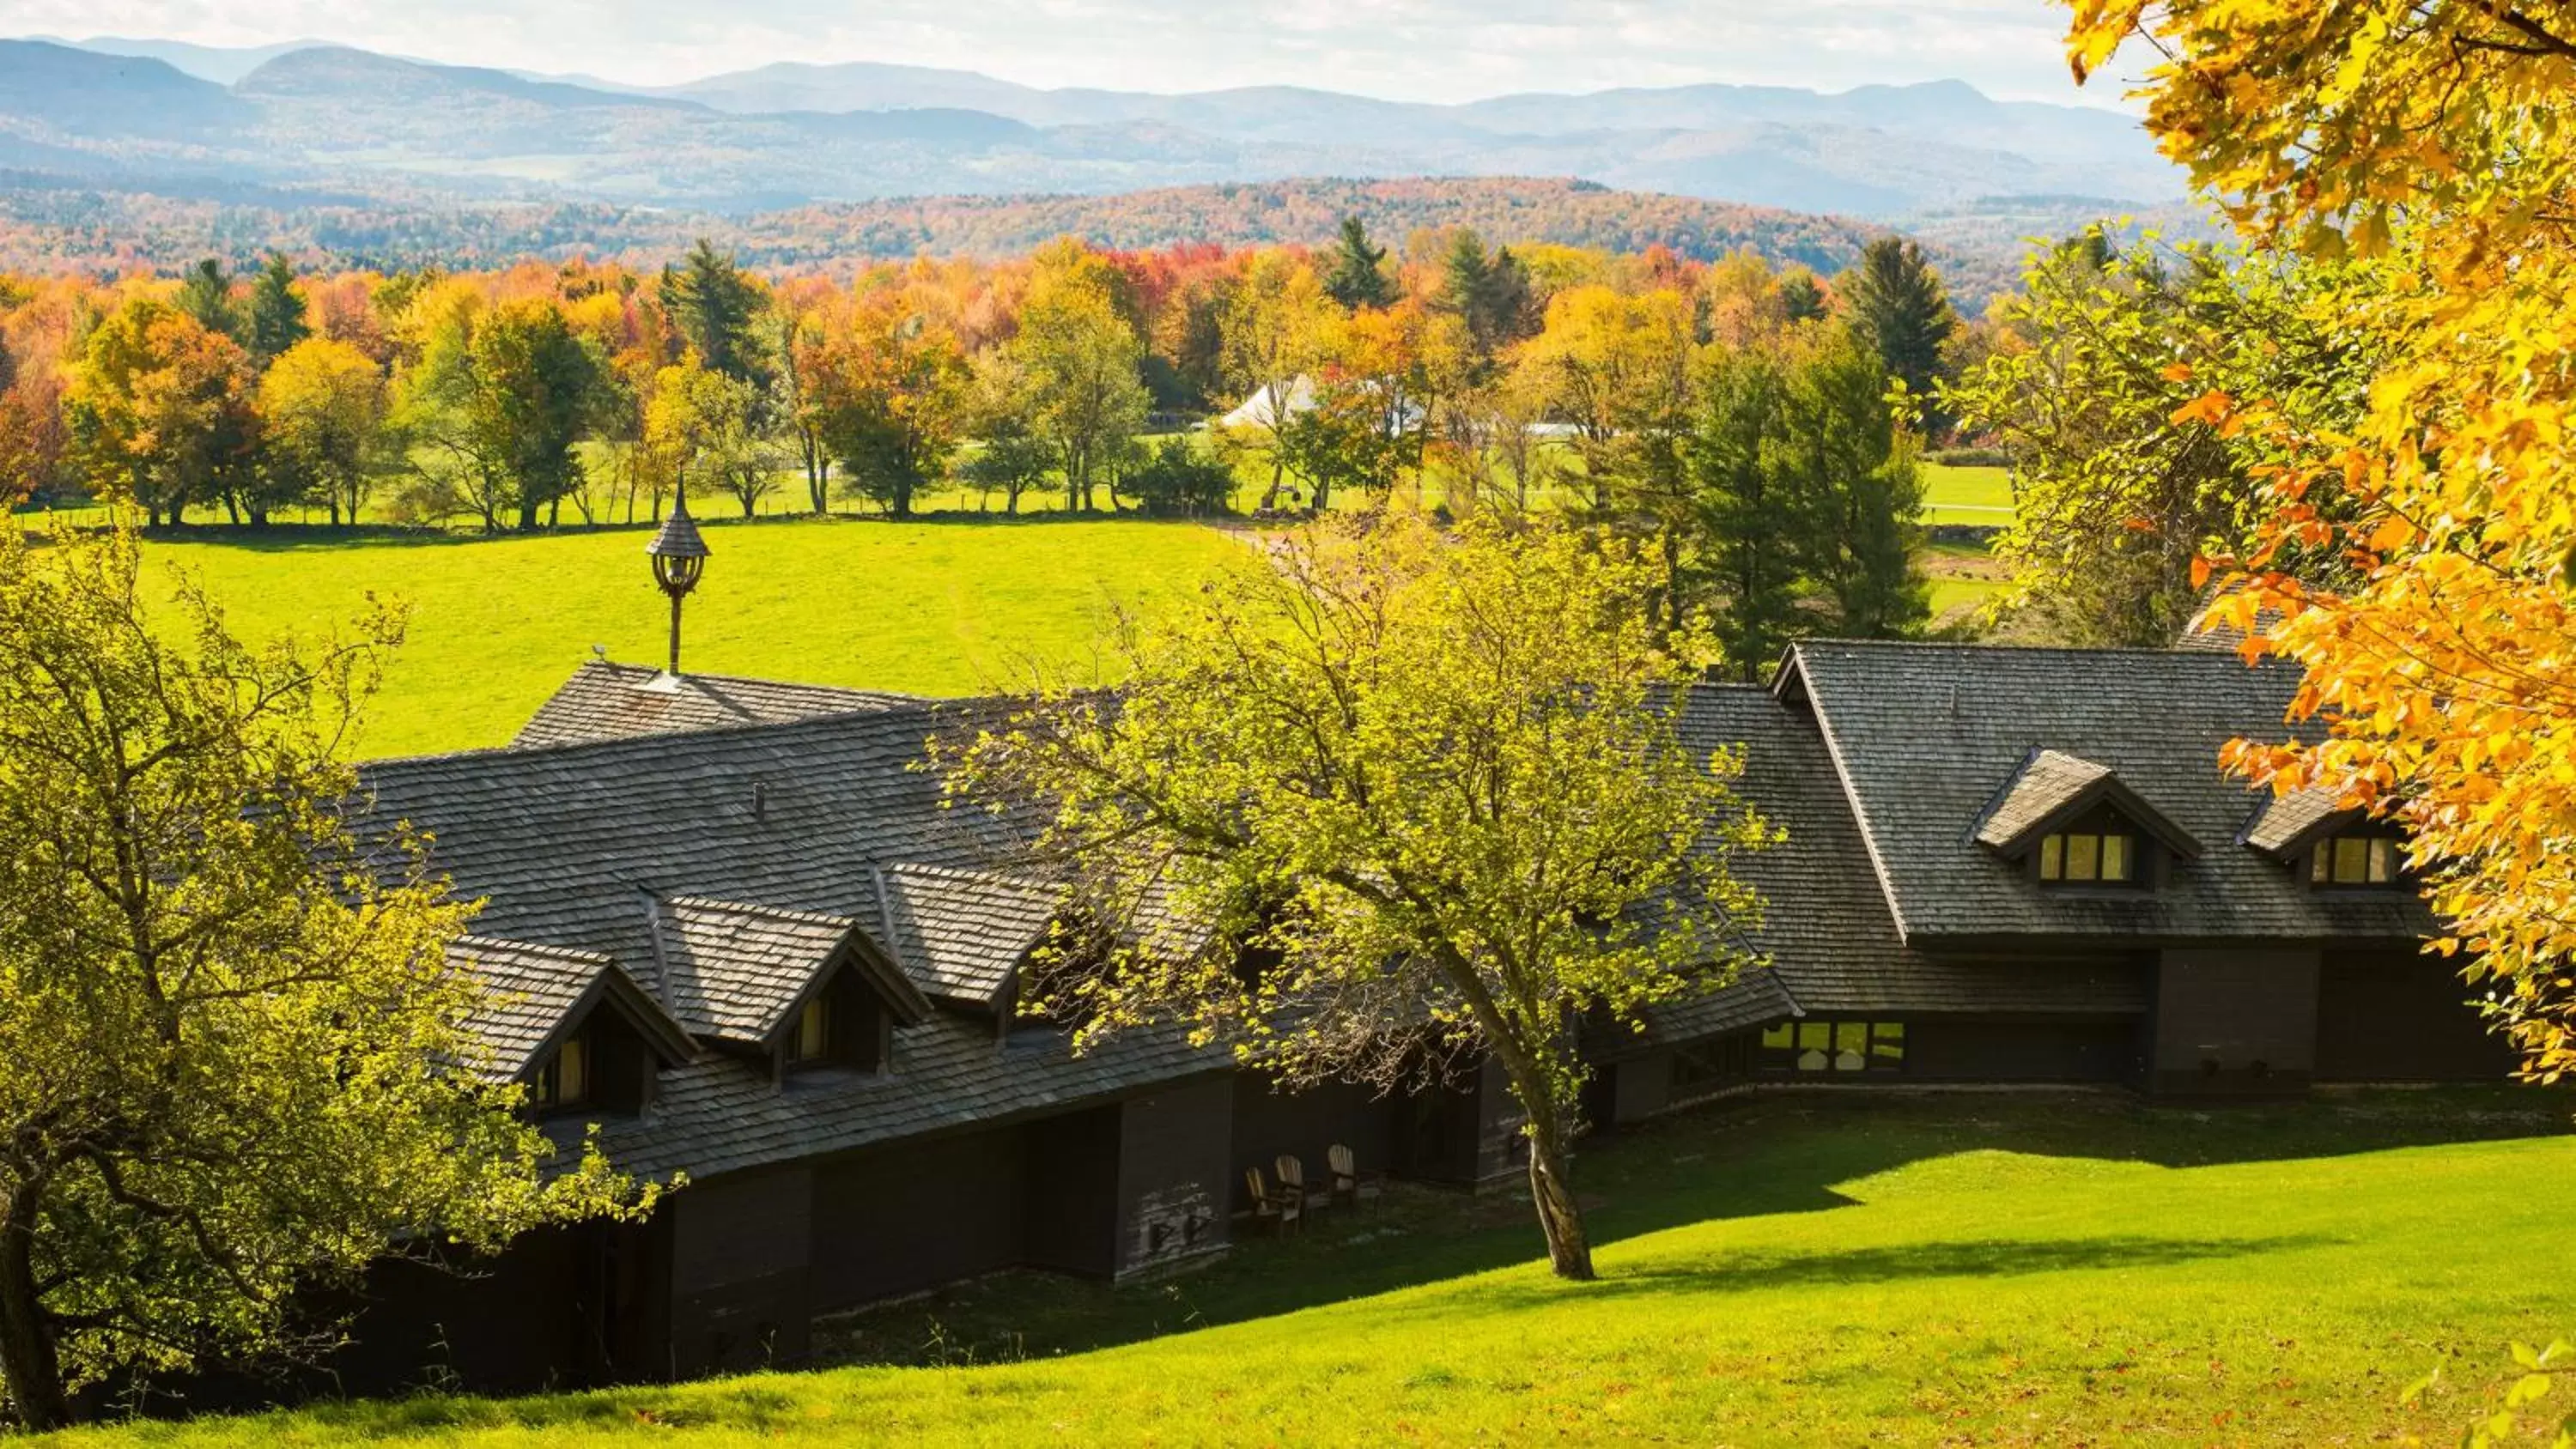 Bird's eye view in Trapp Family Lodge